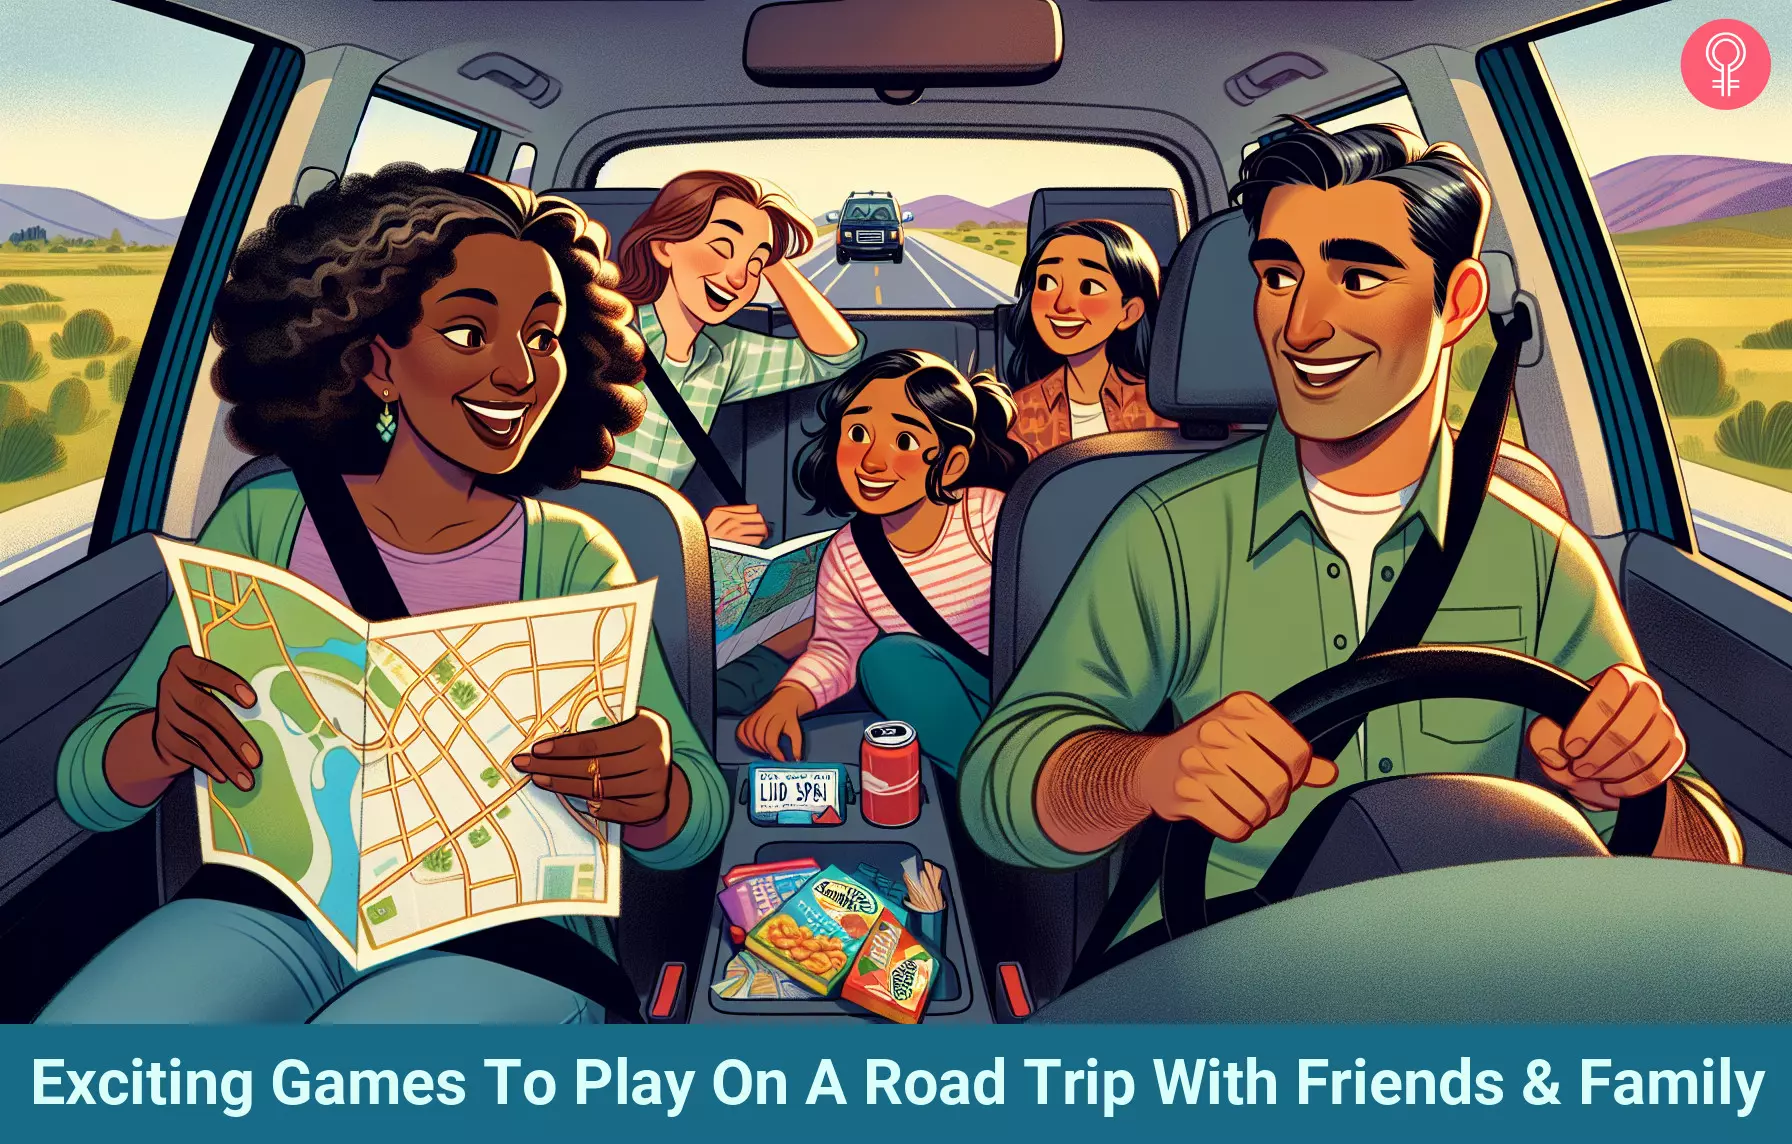 games to play on a road trip_illustration